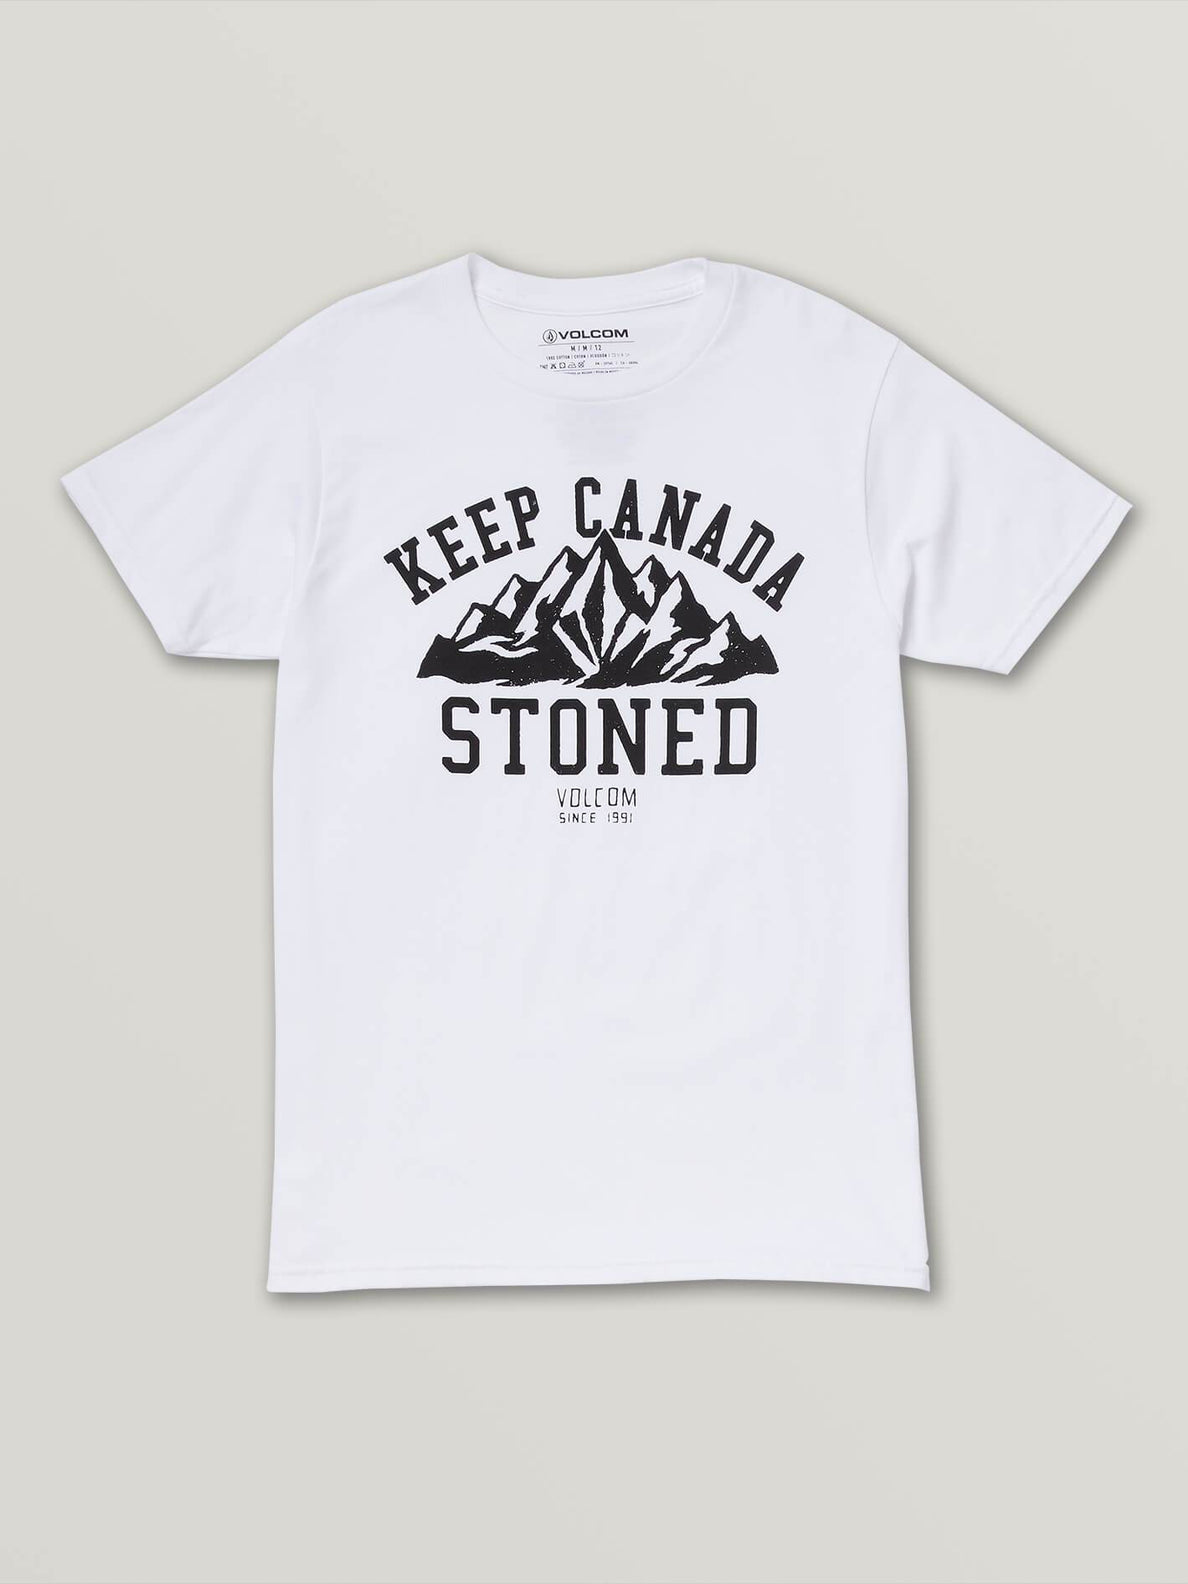 Stoned Short Sleeve Tee In White, Front View